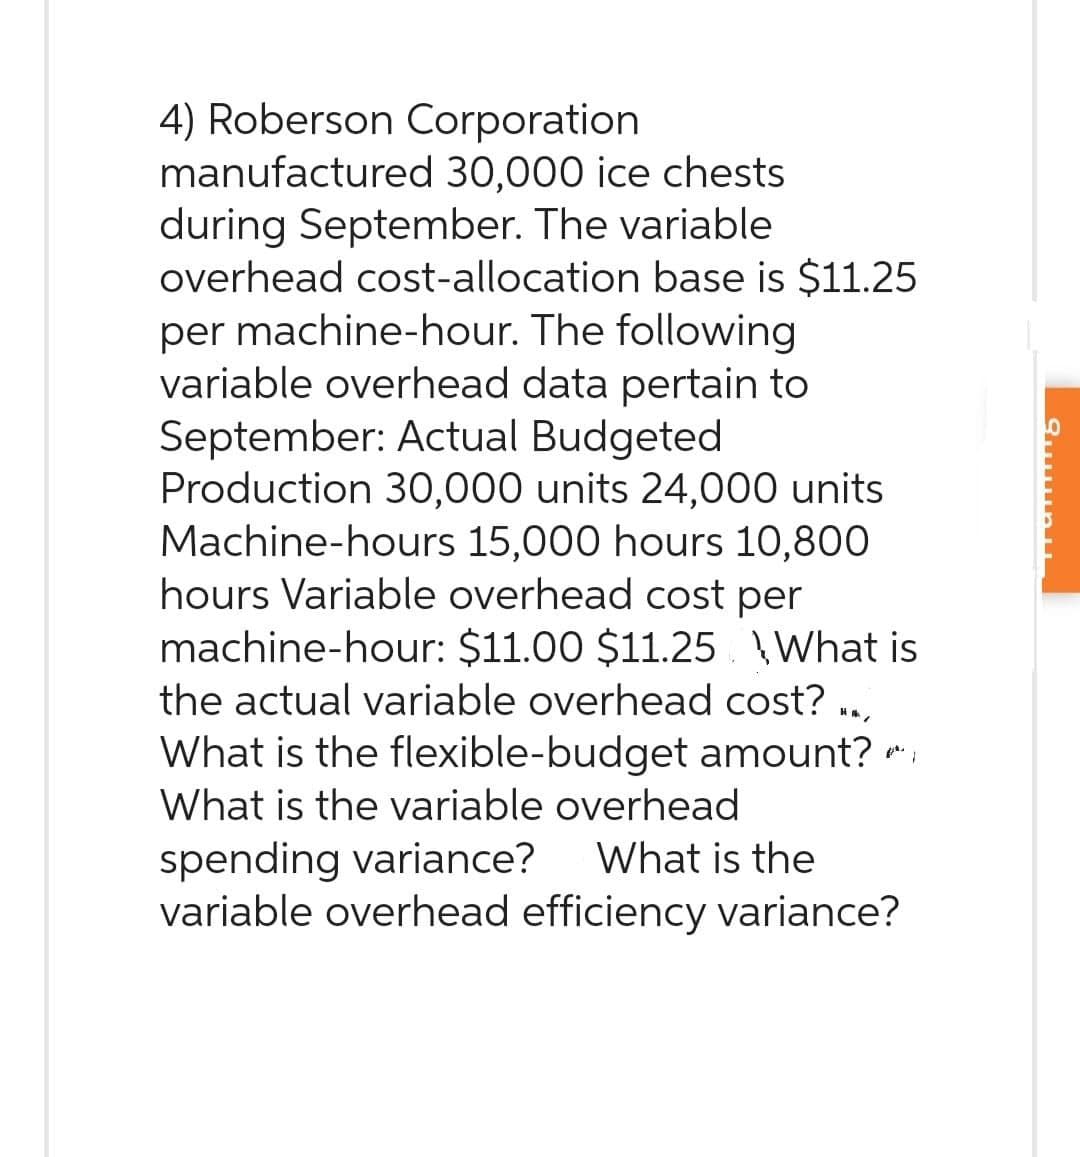 4) Roberson Corporation
manufactured 30,000 ice chests
during September. The variable
overhead cost-allocation base is $11.25
per machine-hour. The following
variable overhead data pertain to
September: Actual Budgeted
Production 30,000 units 24,000 units
Machine-hours 15,000 hours 10,800
hours Variable overhead cost per
machine-hour: $11.00 $11.25 What is
the actual variable overhead cost?
What is the flexible-budget amount?
What is the variable overhead
spending variance? What is the
variable overhead efficiency variance?
Surubu